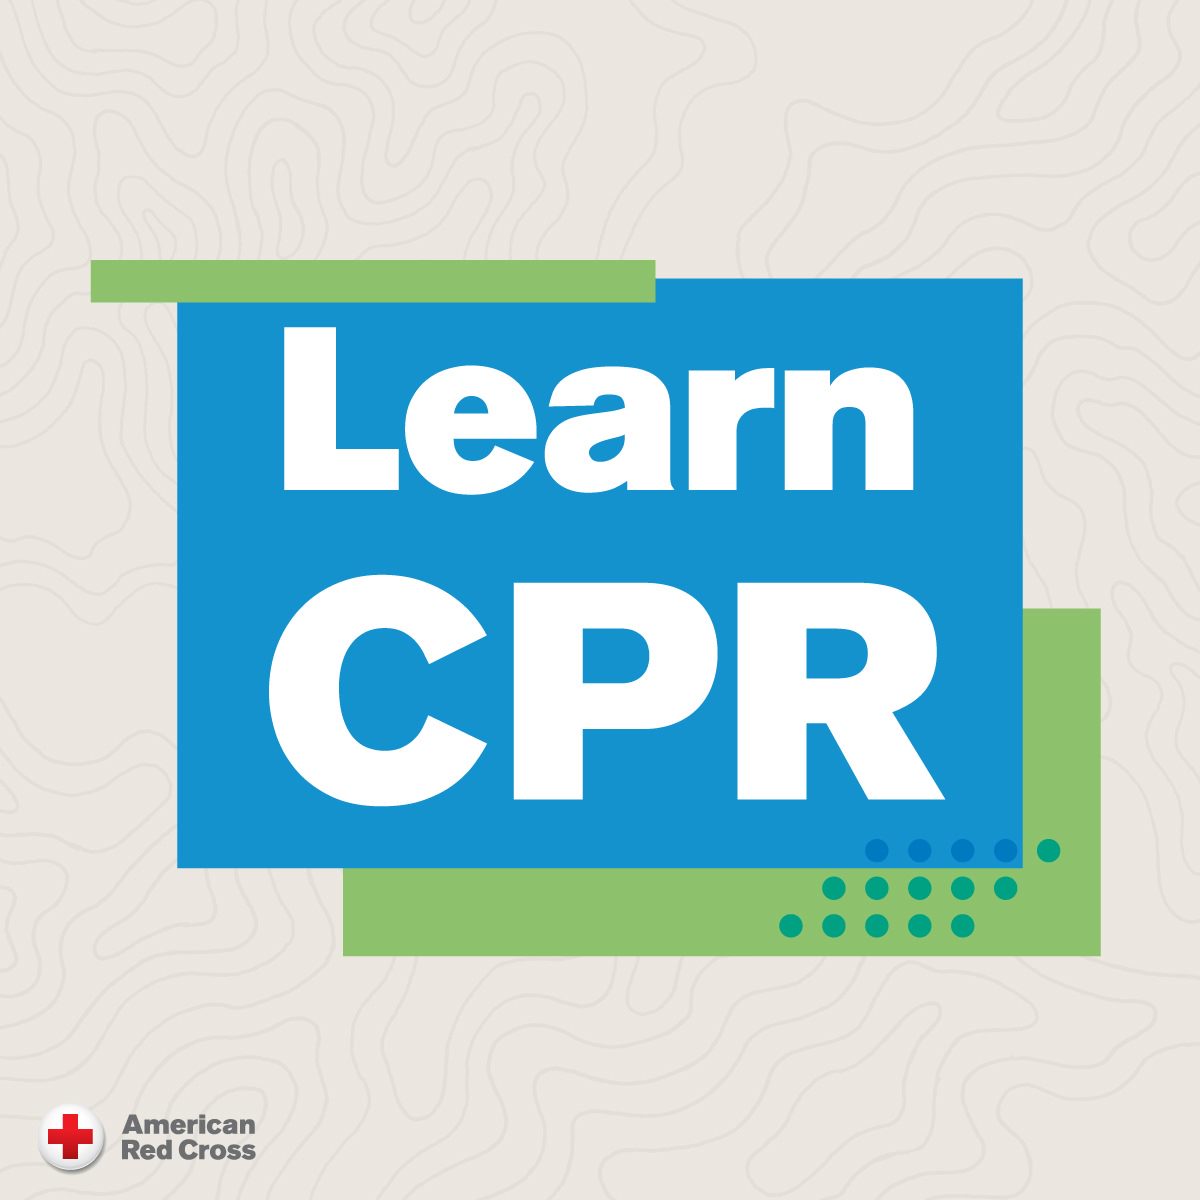 There are about half-million cardiac arrests each year. CPR can help save a life if someone stops breathing or their heart stops. CPR also doubles or triples the chance of survival when bystanders take action. Learn CPR today! Take a CPR Class: rdcrss.org/3lPqkND